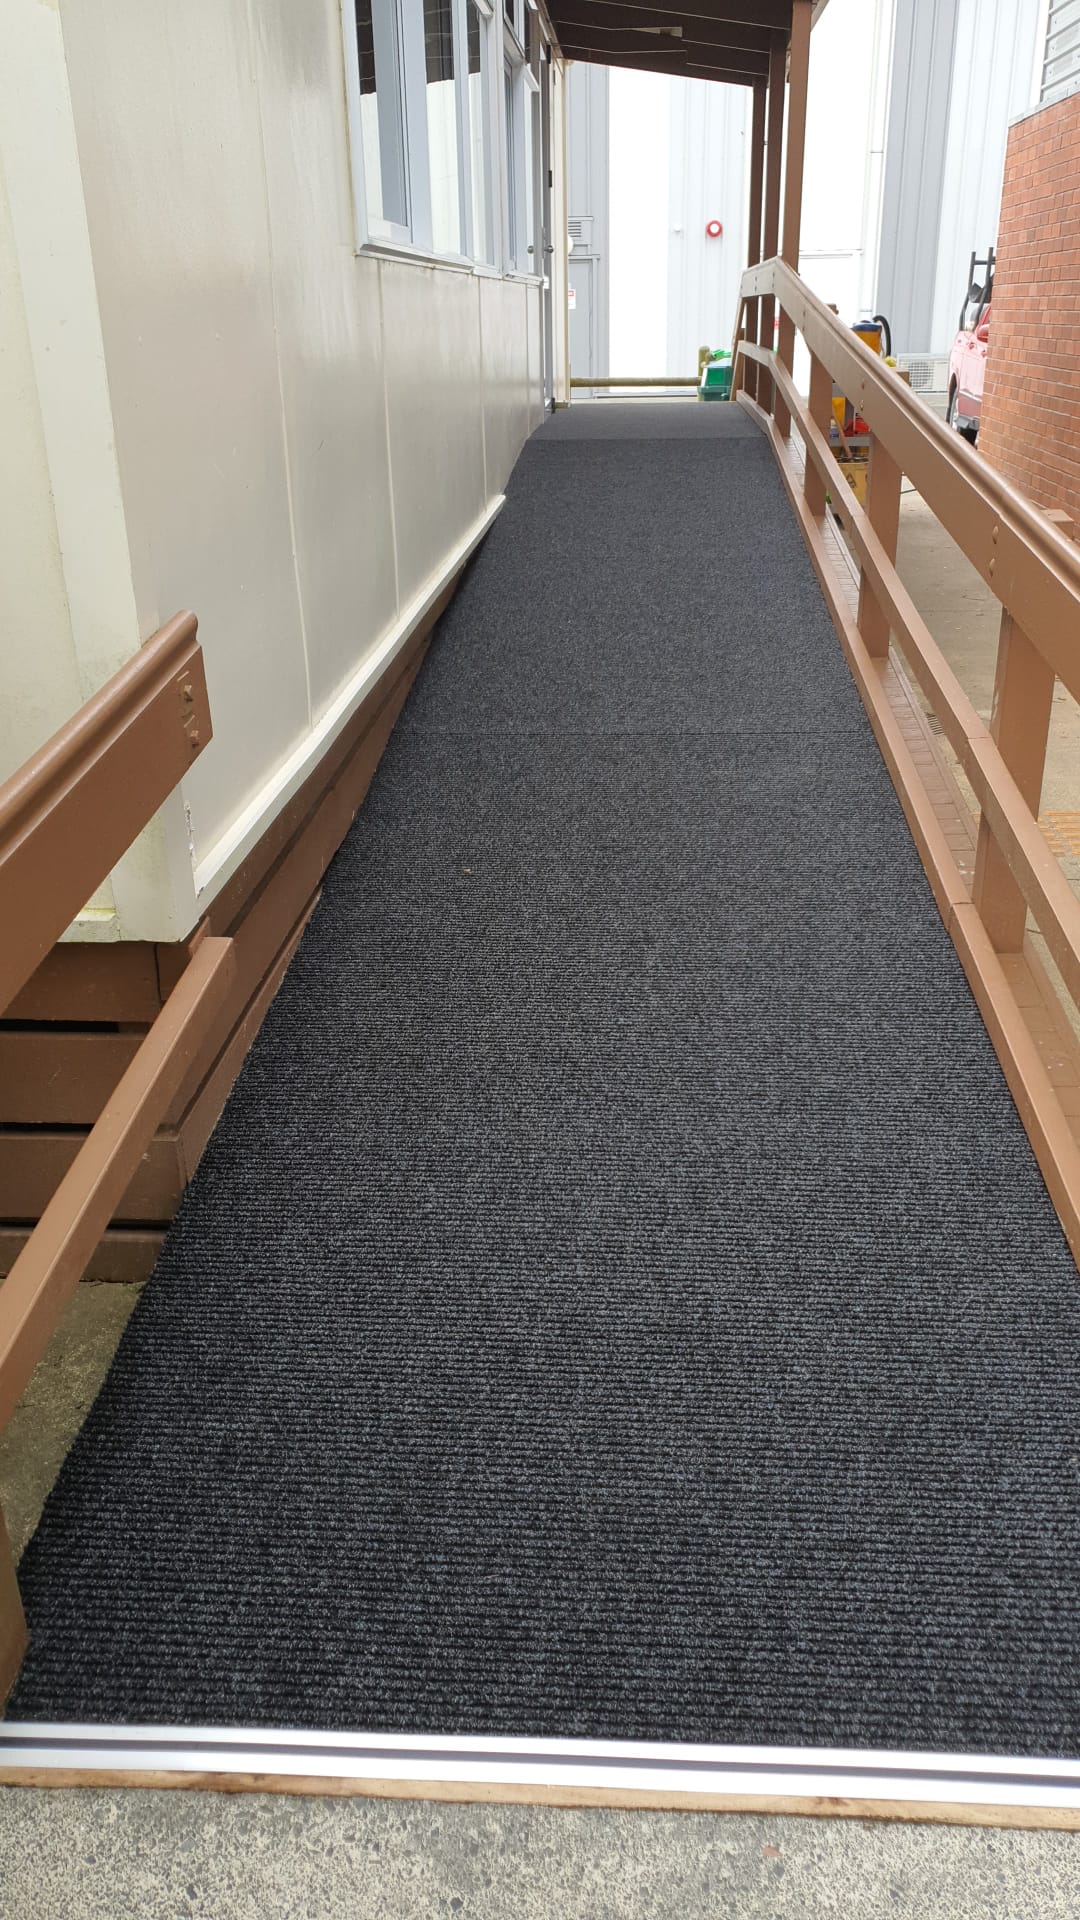 Slimrib Outdoor carpet installed on a ramp.